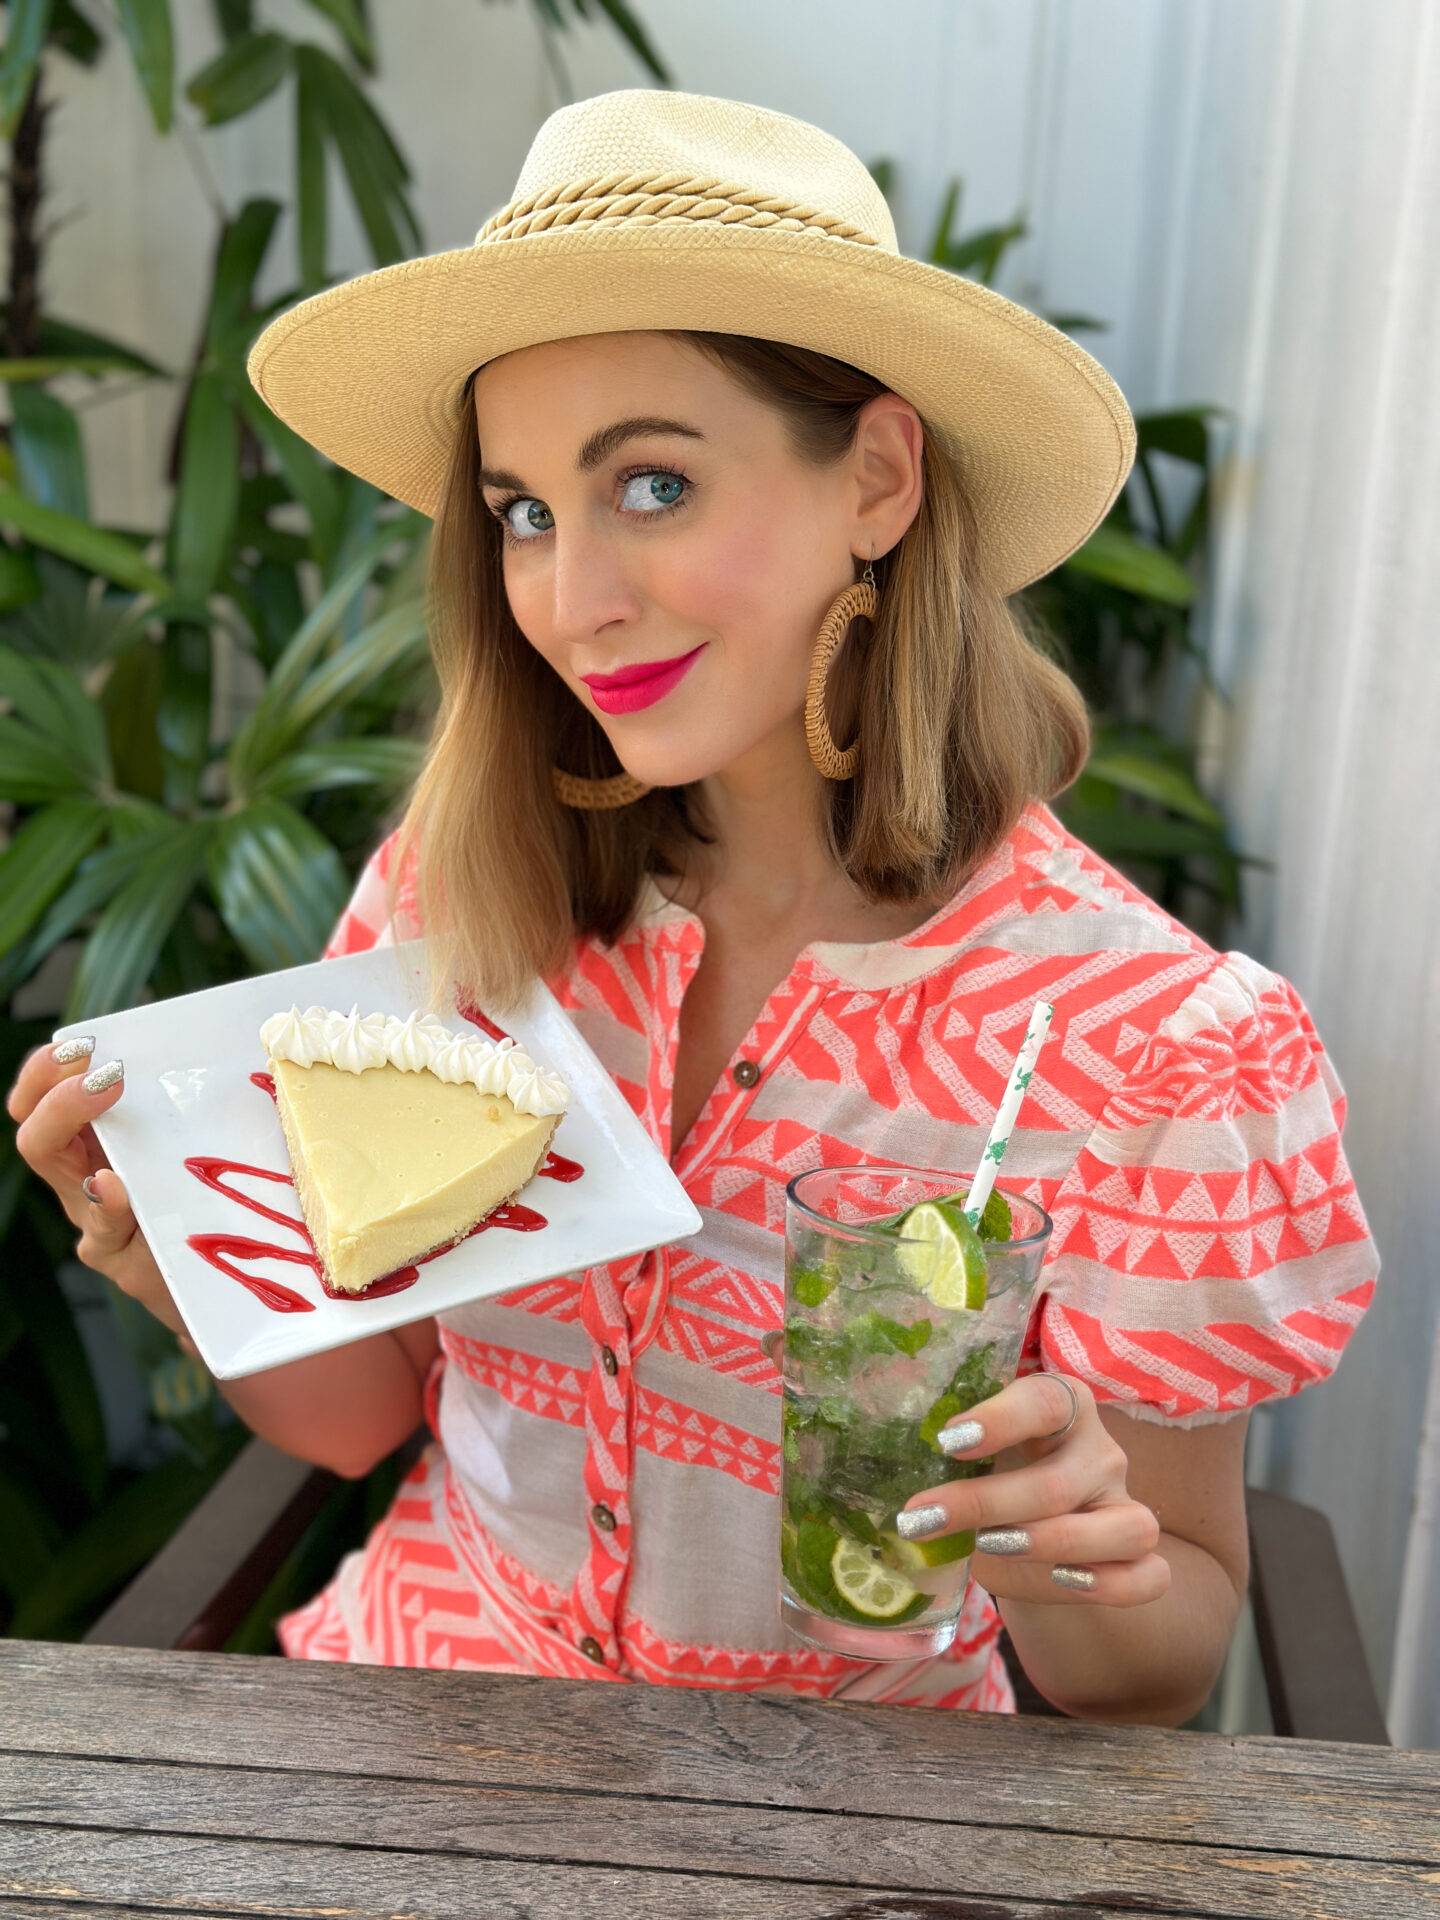 My Quest for the Ultimate Key Lime Pie in the Florida Keys